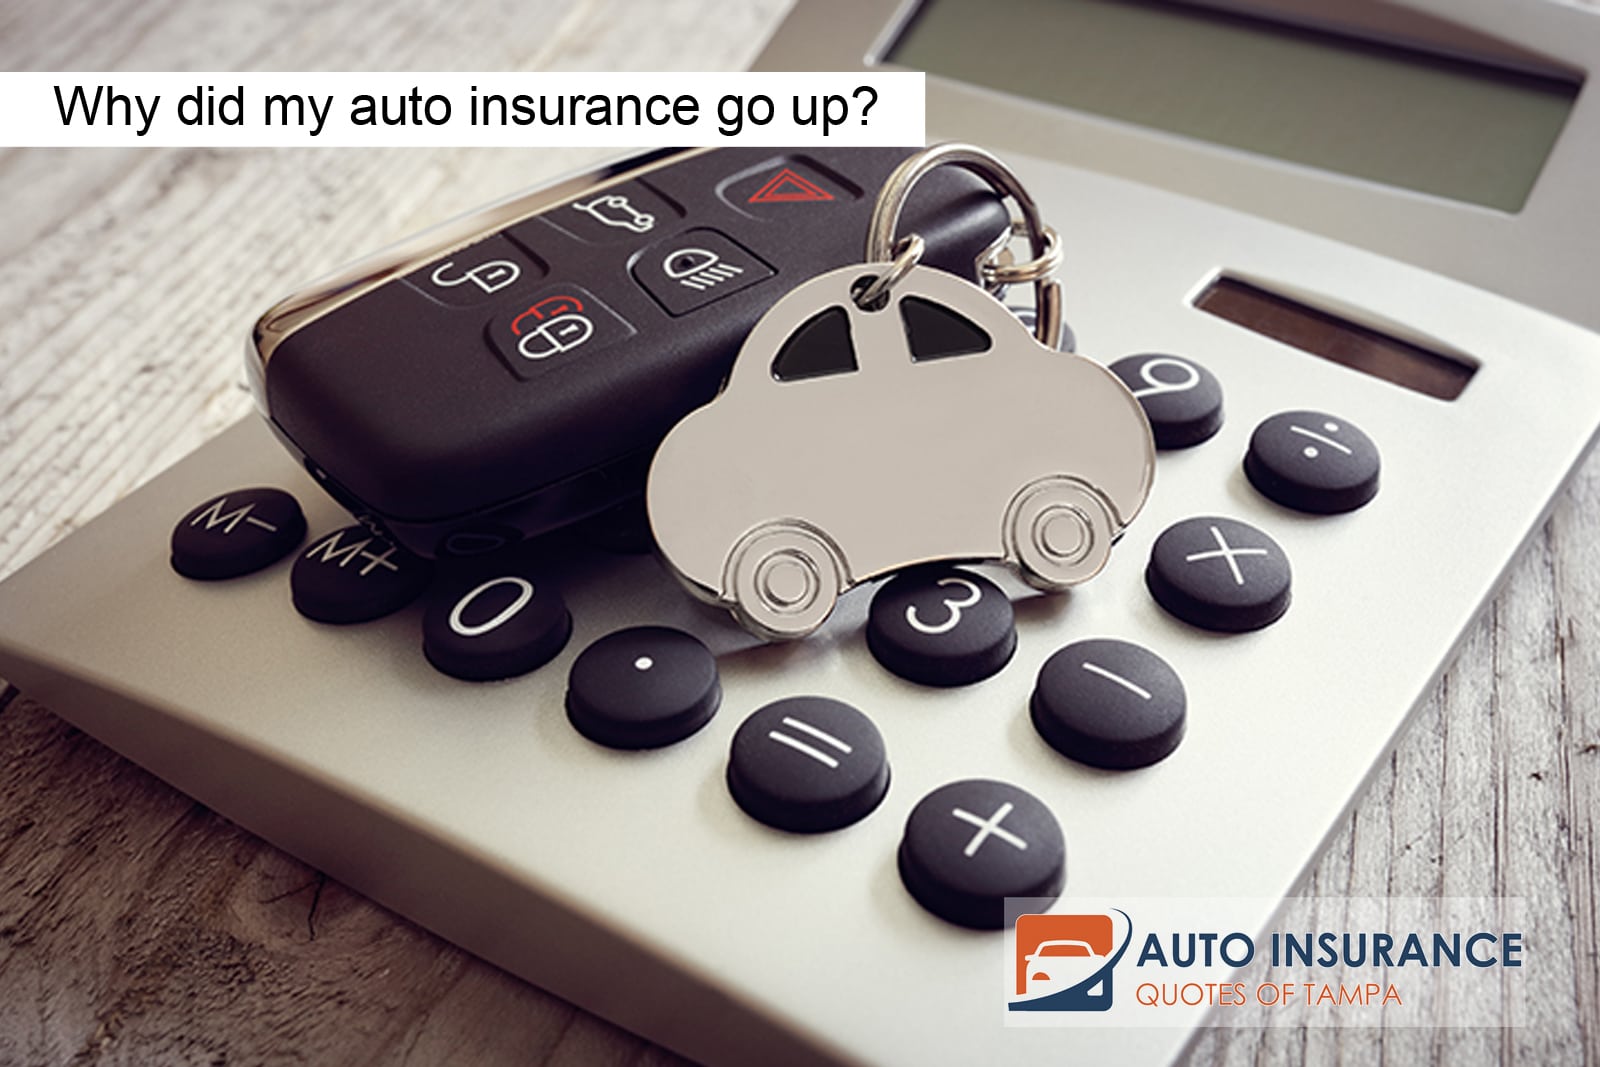 Why did my auto insurance go up?